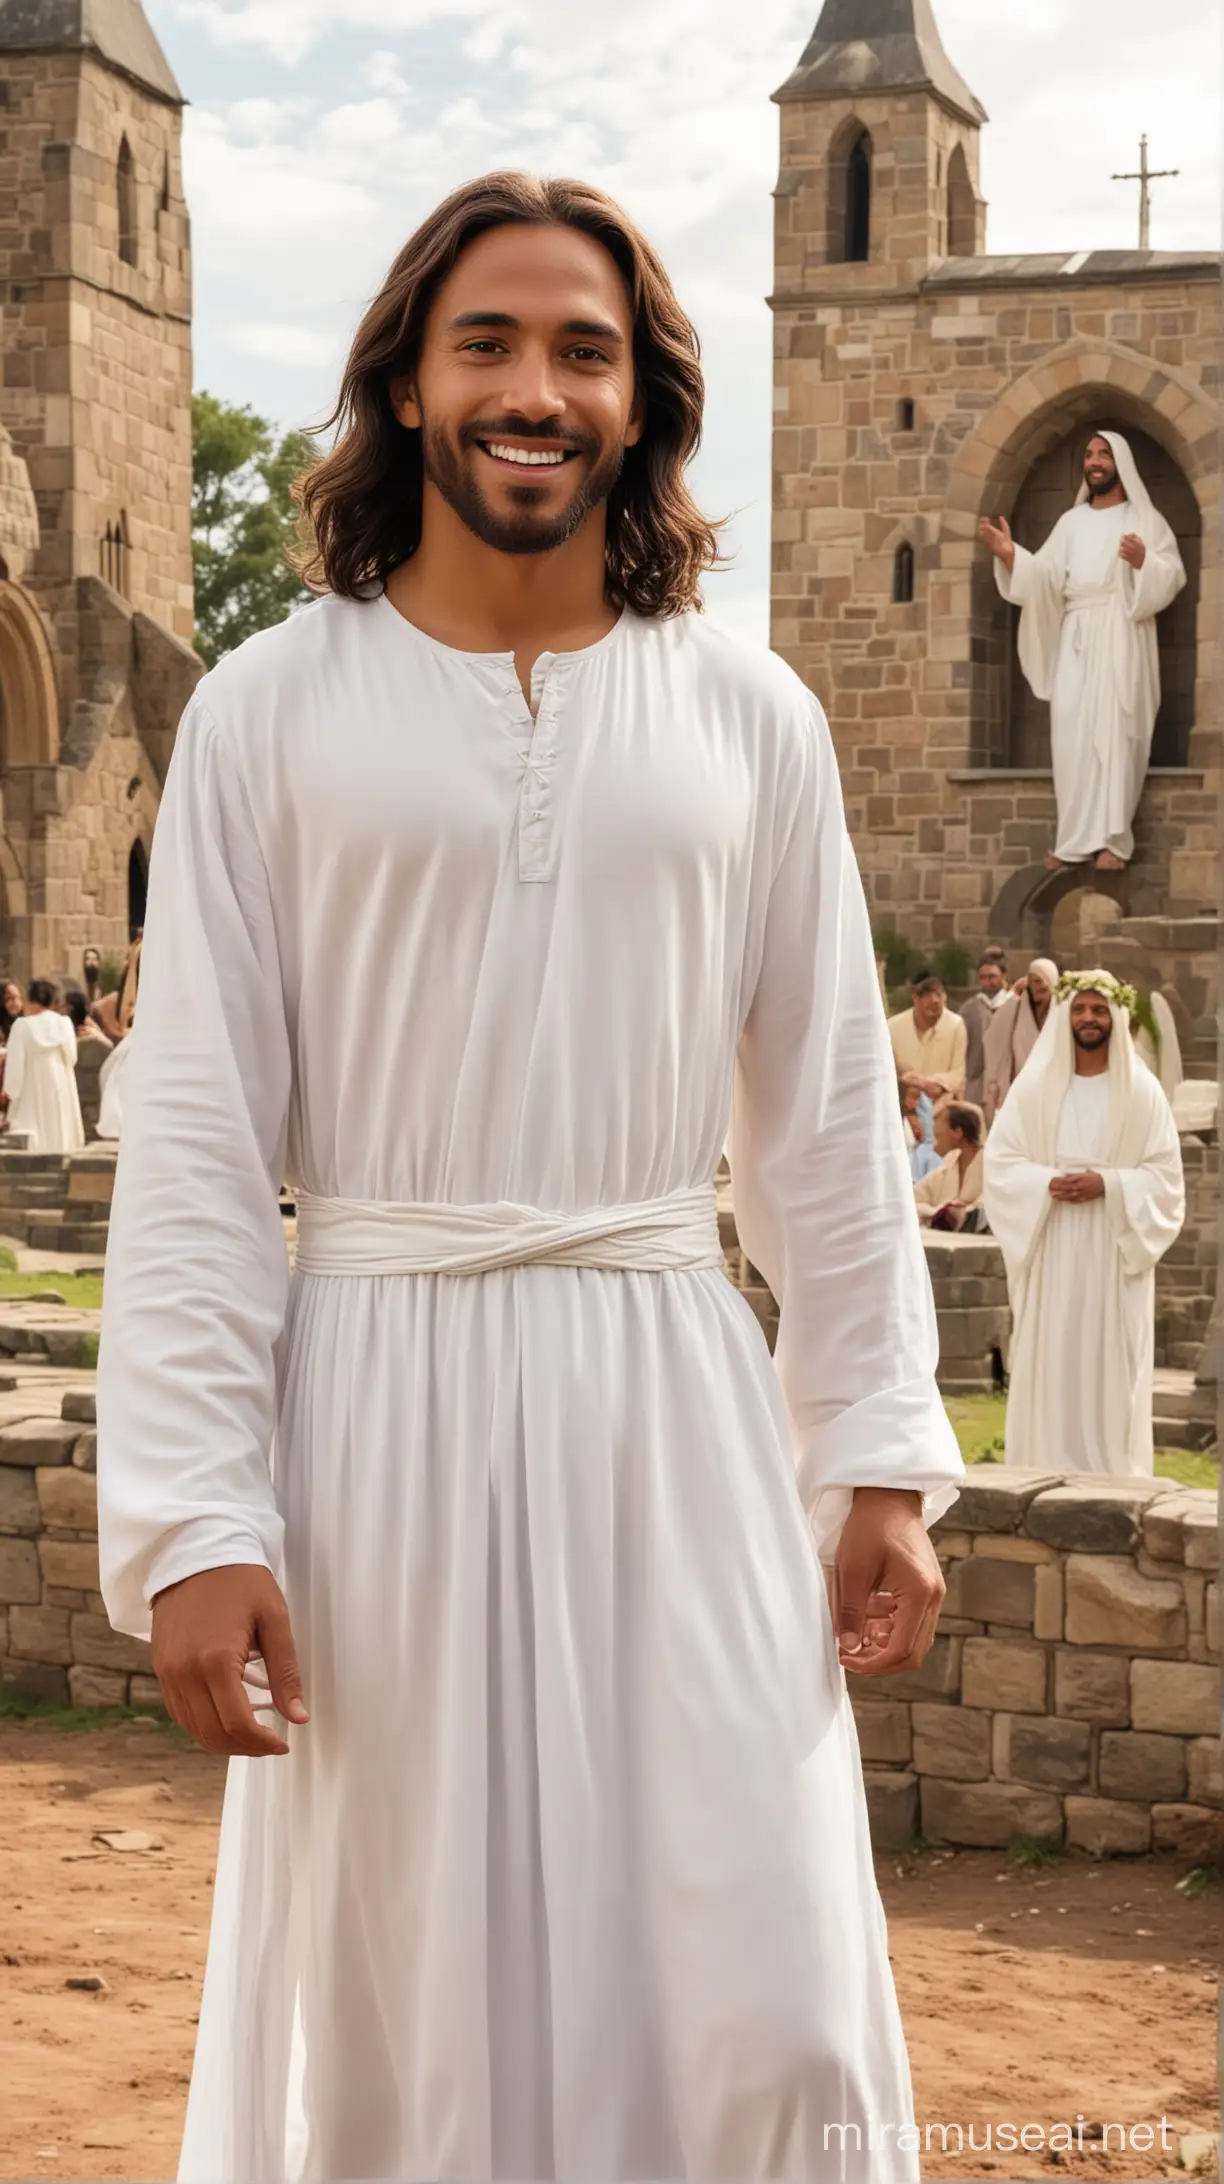 Jesus in white dress, slightly smiling, brown skin, churches in the background 